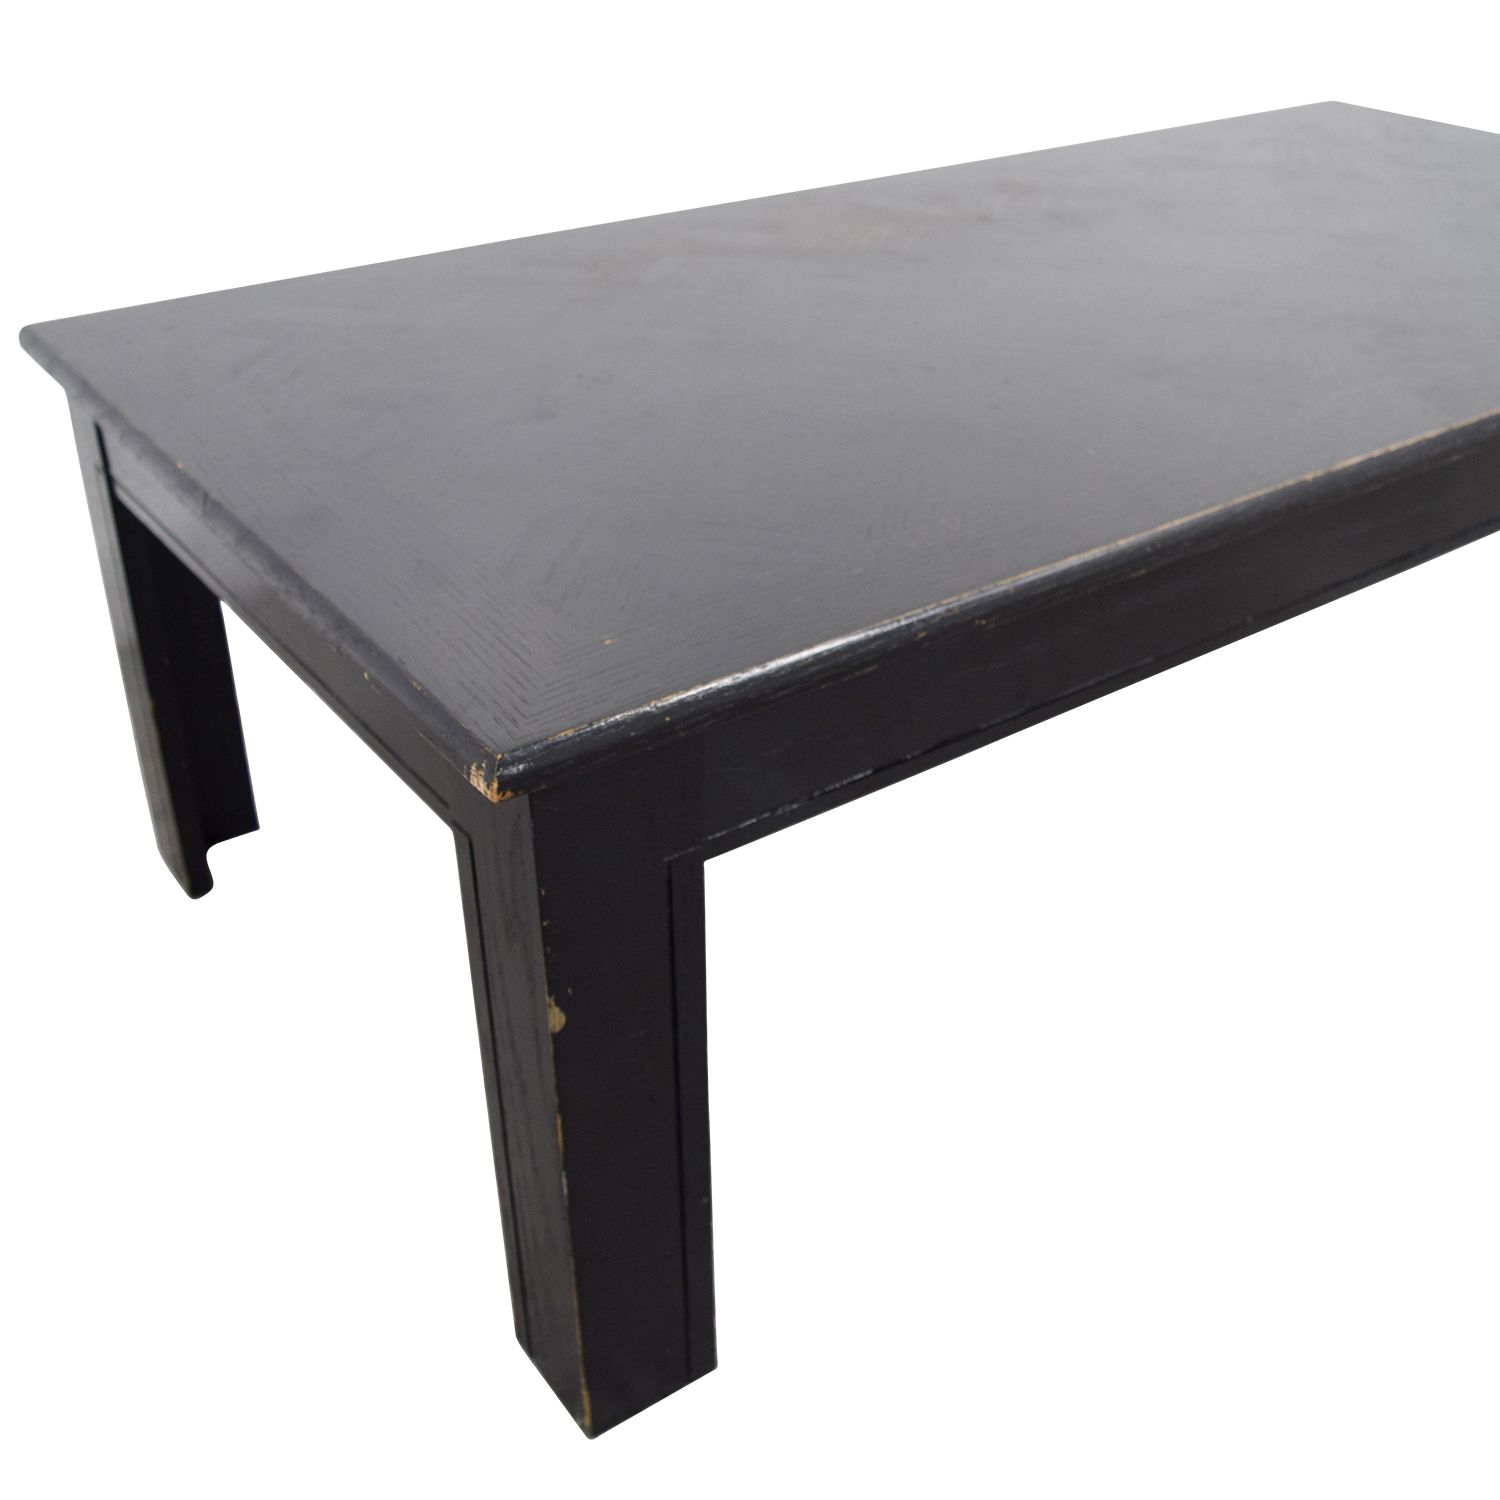 69% Off – Black Rectangular Coffee Table / Tables Intended For Black And White Coffee Tables (View 11 of 15)